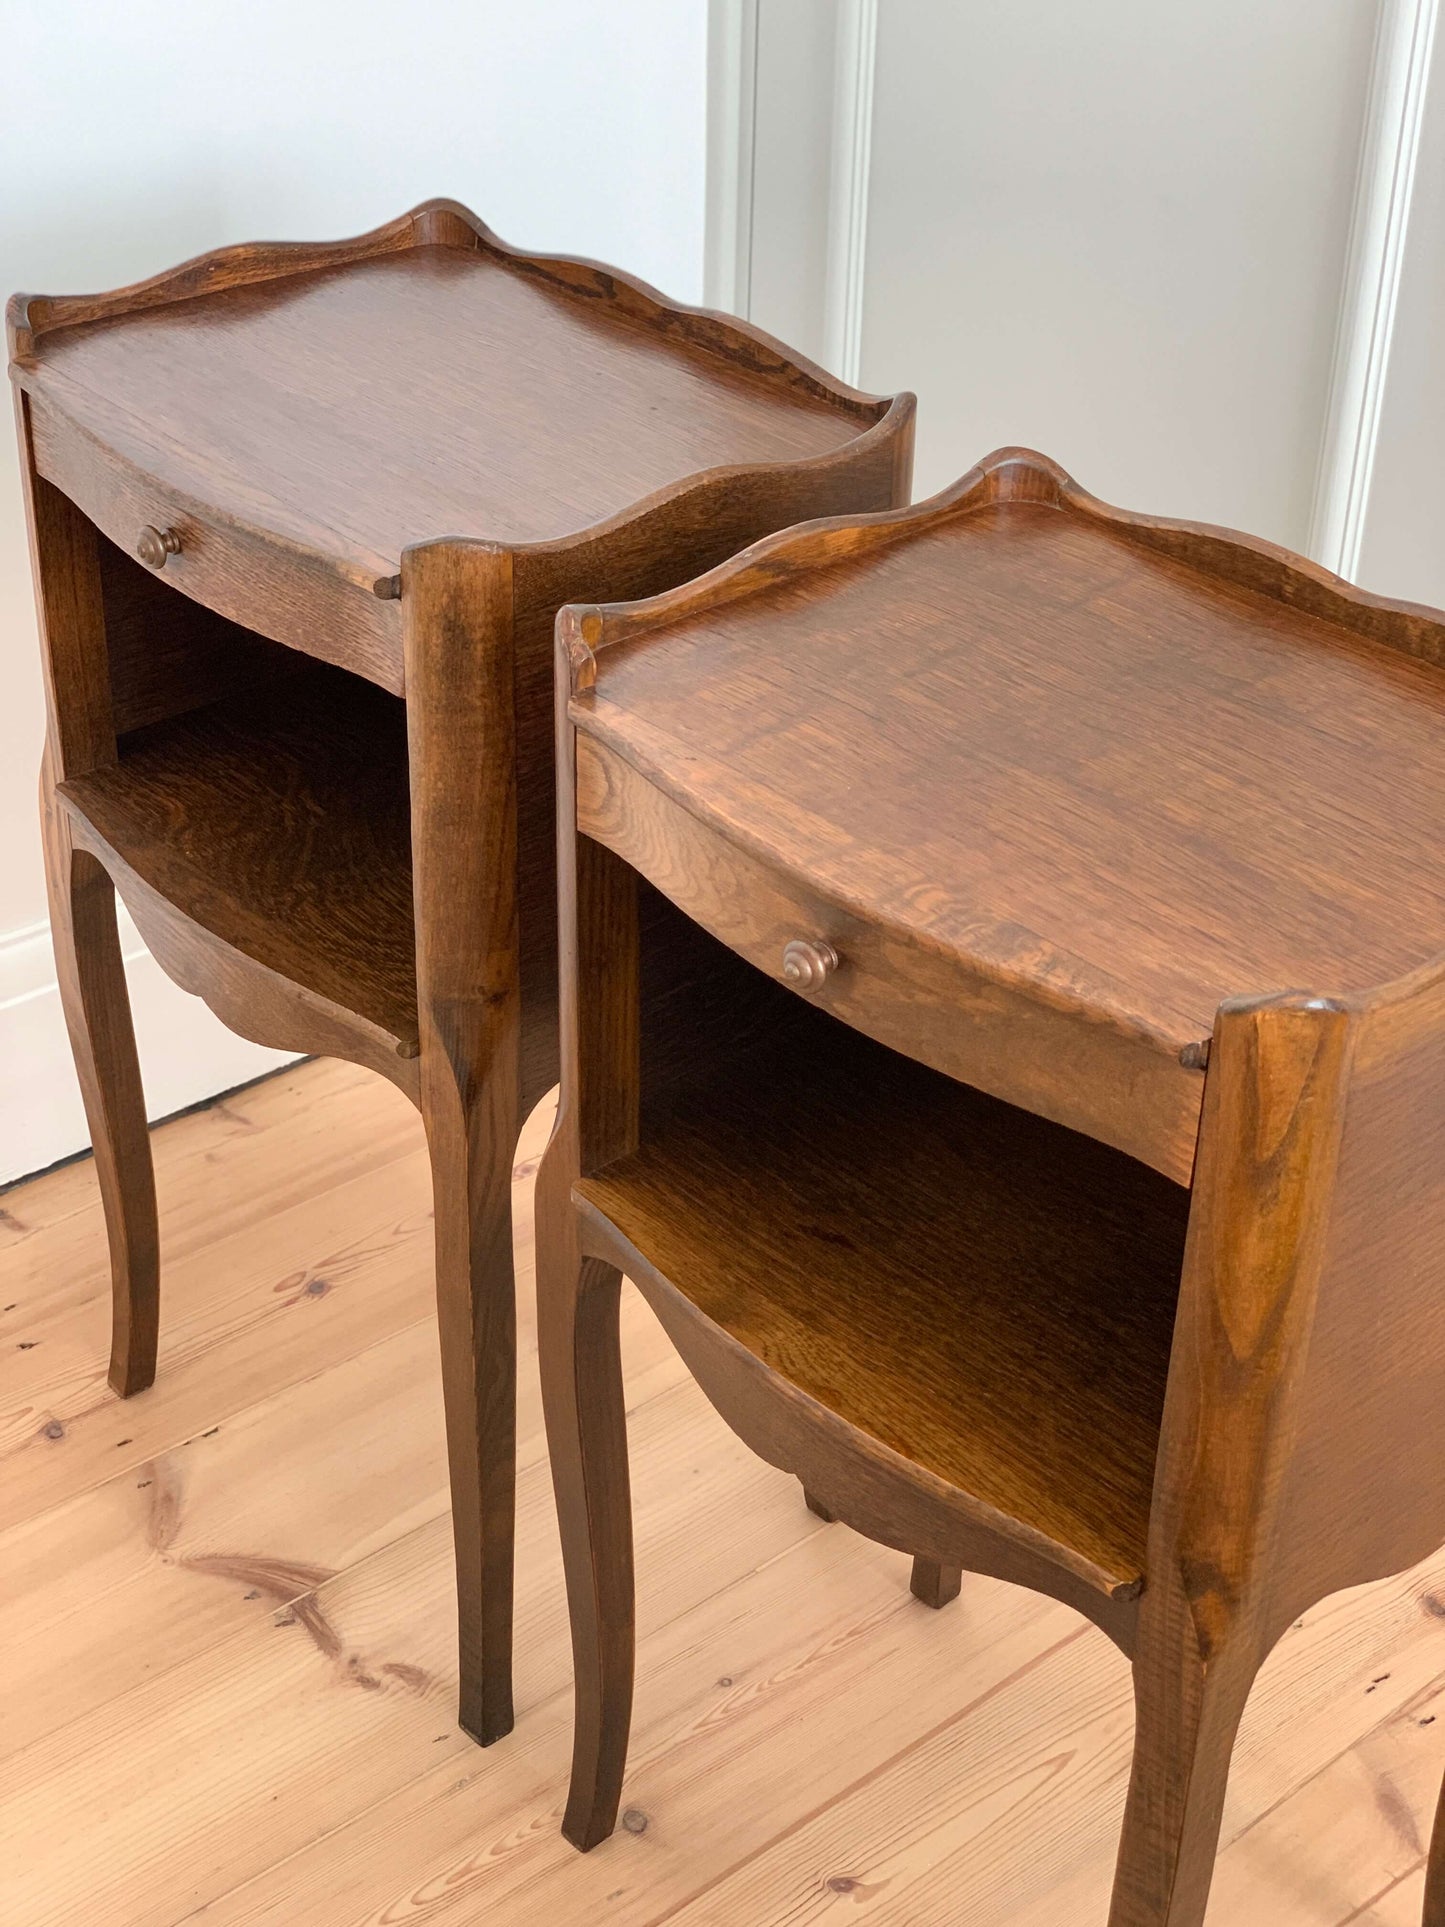 Pair of French vintage bedside tables